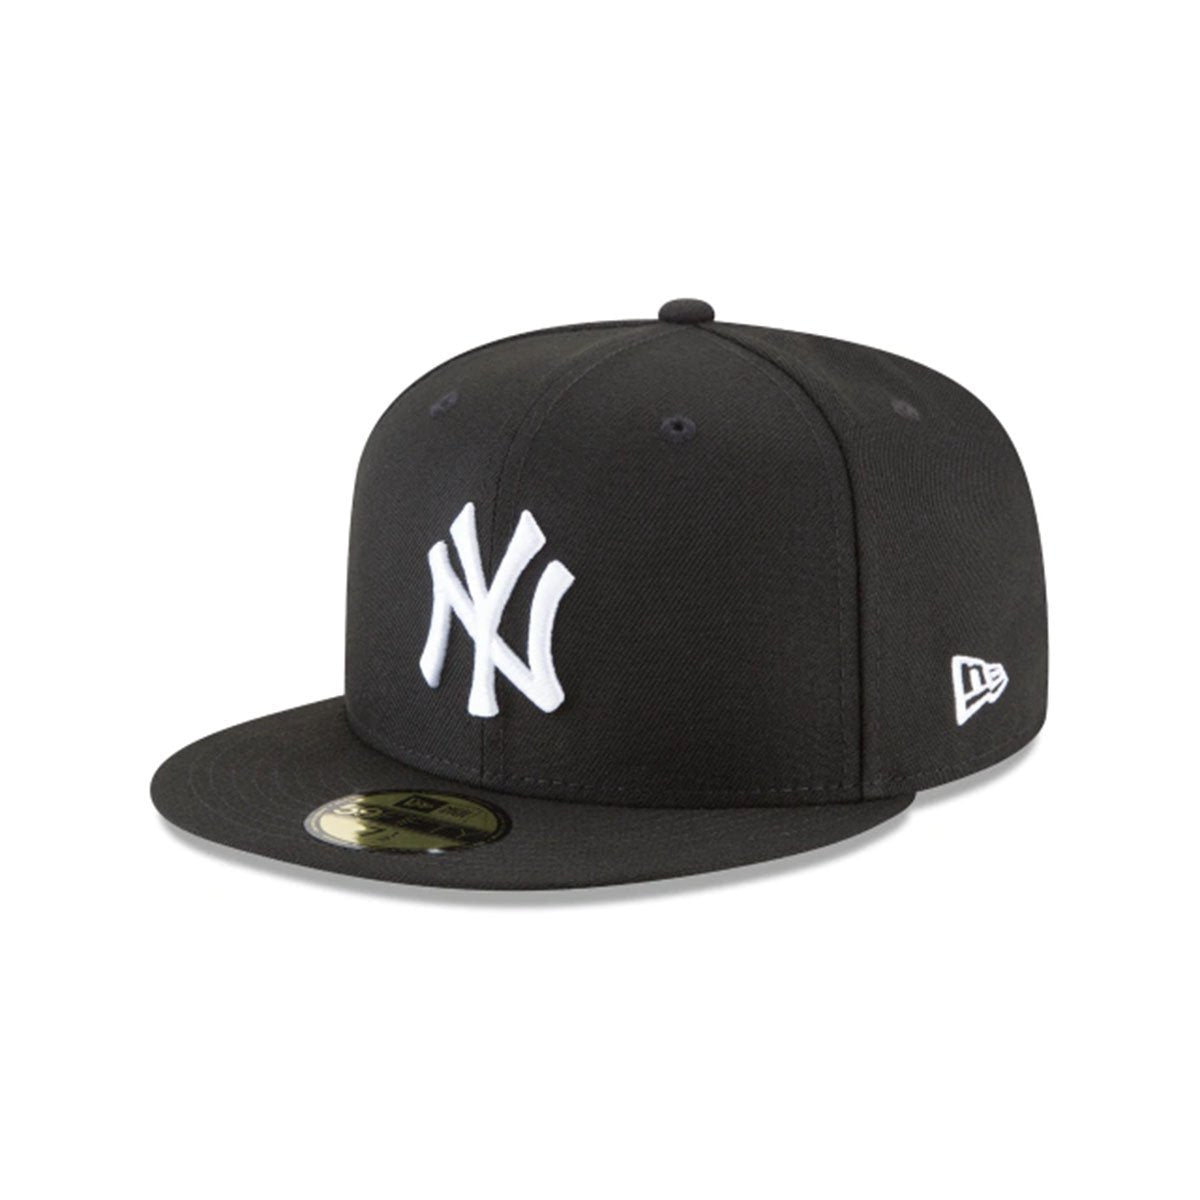 New York Yankees Basic Black and White 59FIFTY Fitted